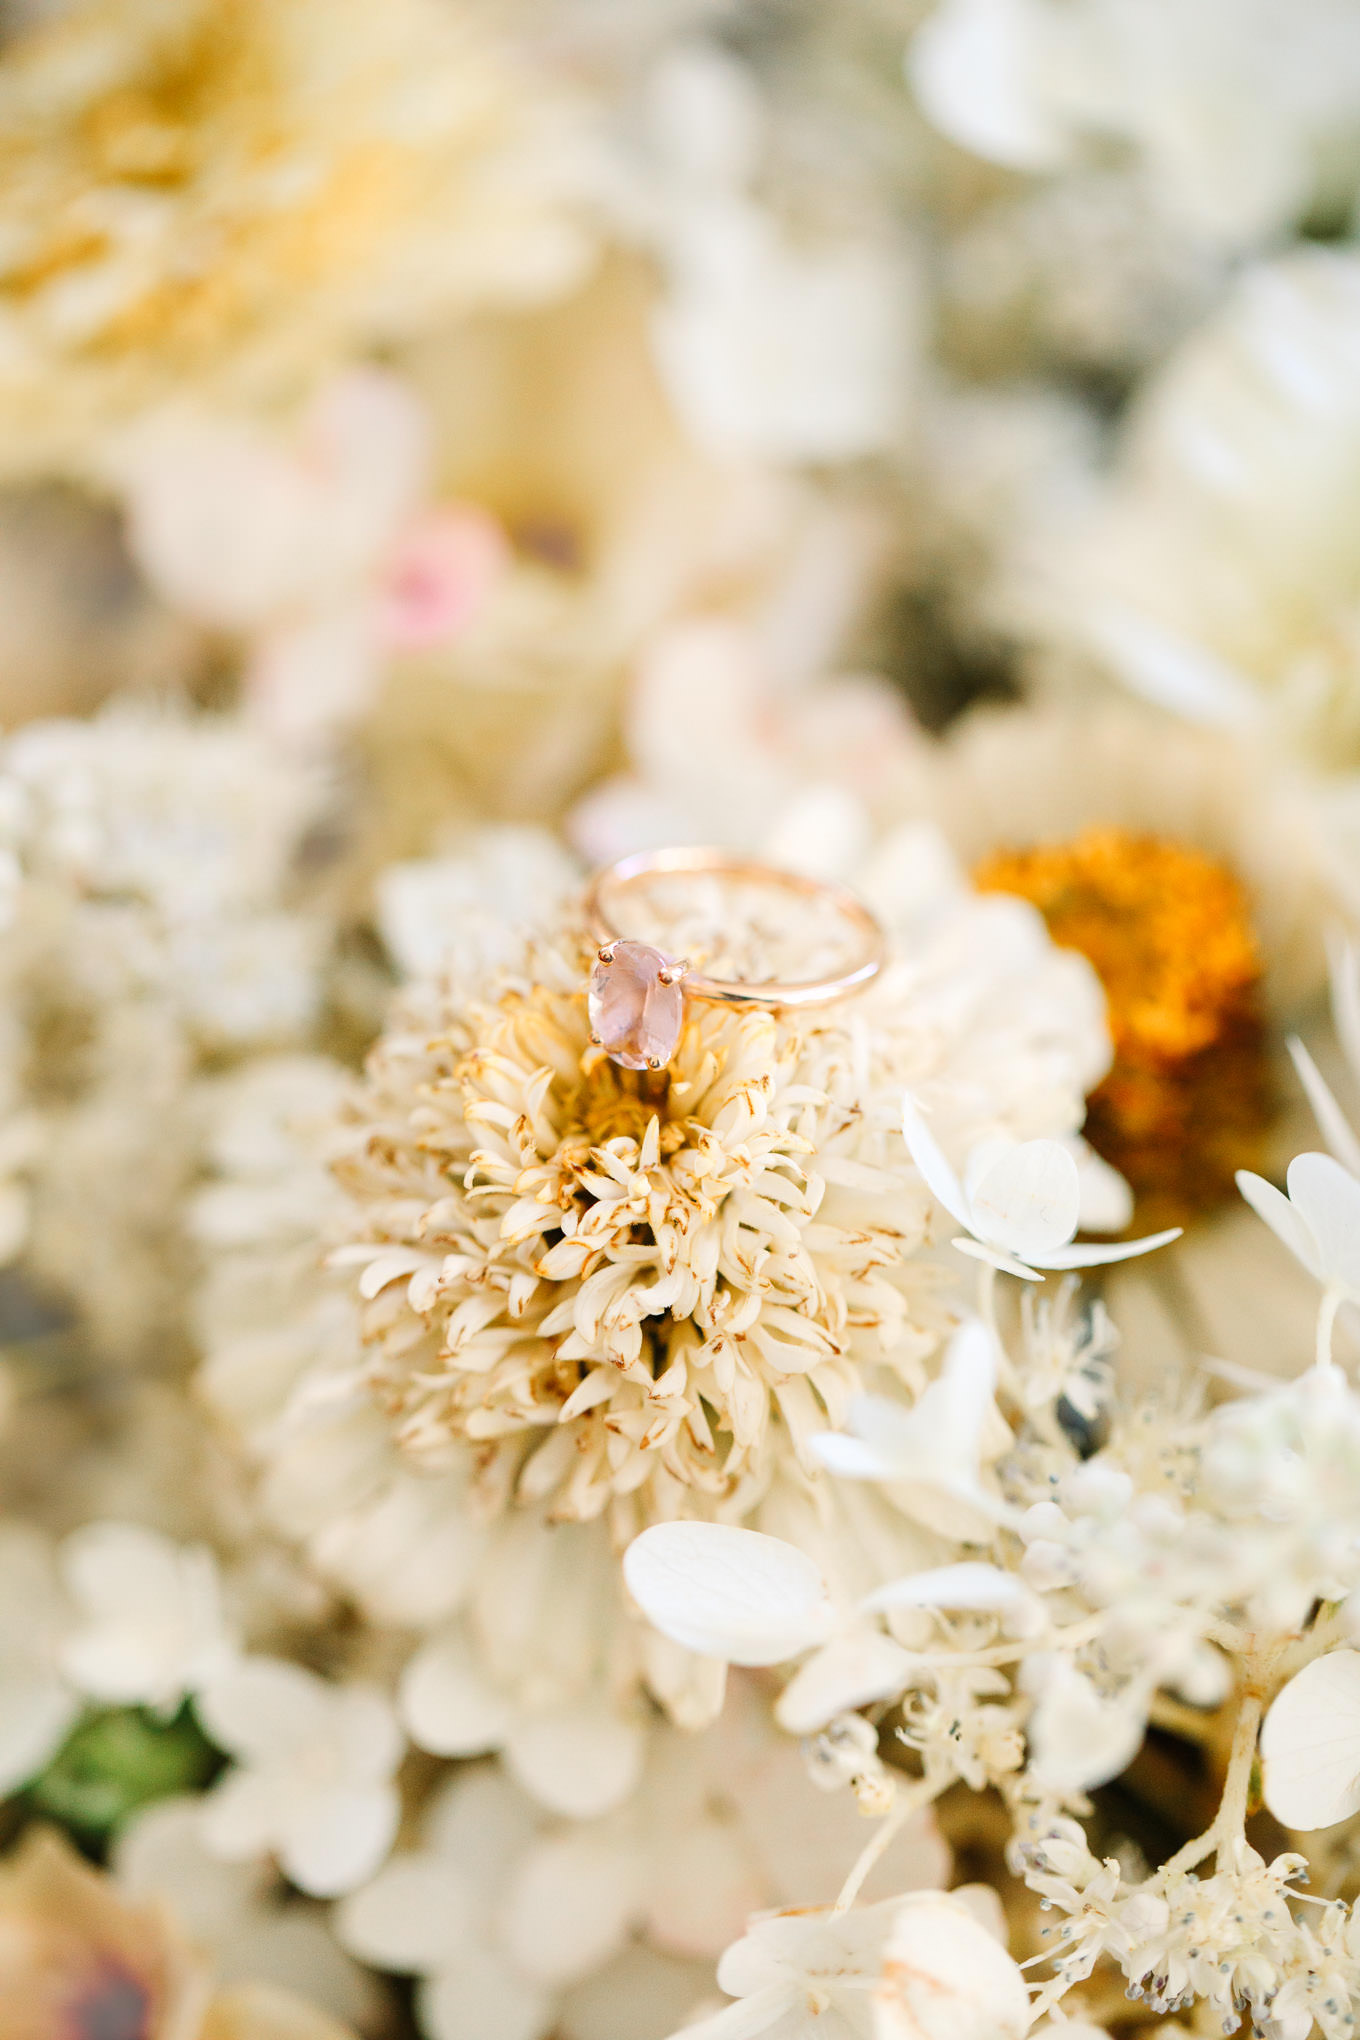 Rose gold pink diamond engagement ring on boho bouquet | Los Angeles Arboretum Elopement | Colorful and elevated wedding photography for fun-loving couples in Southern California | #LosAngelesElopement #elopement #LAarboretum #LAskyline #elopementphotos   Source: Mary Costa Photography | Los Angeles